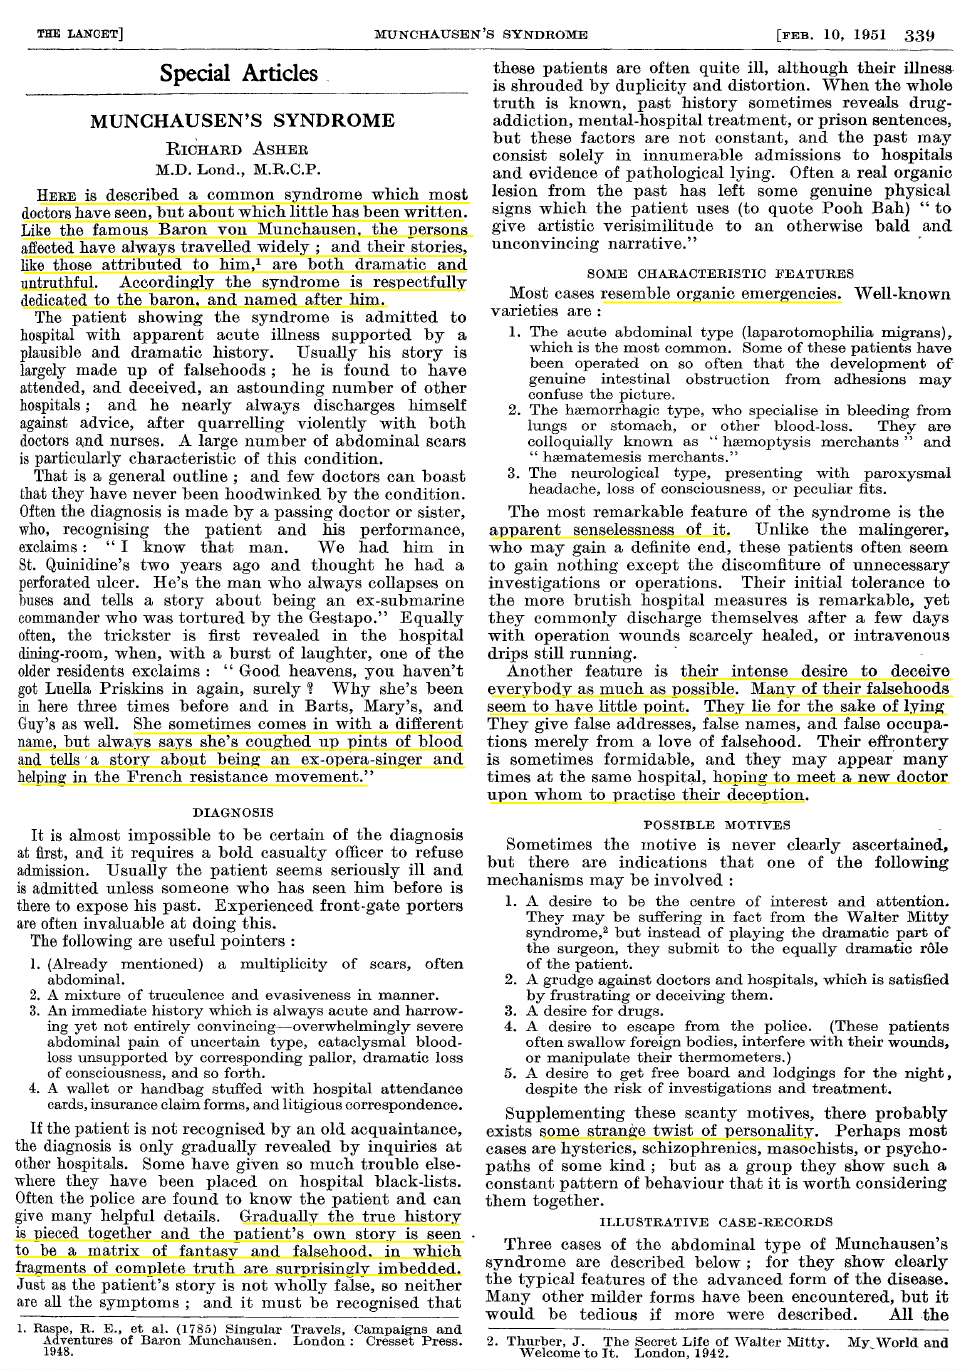  Lancet article by Richard Asher in 1951. 